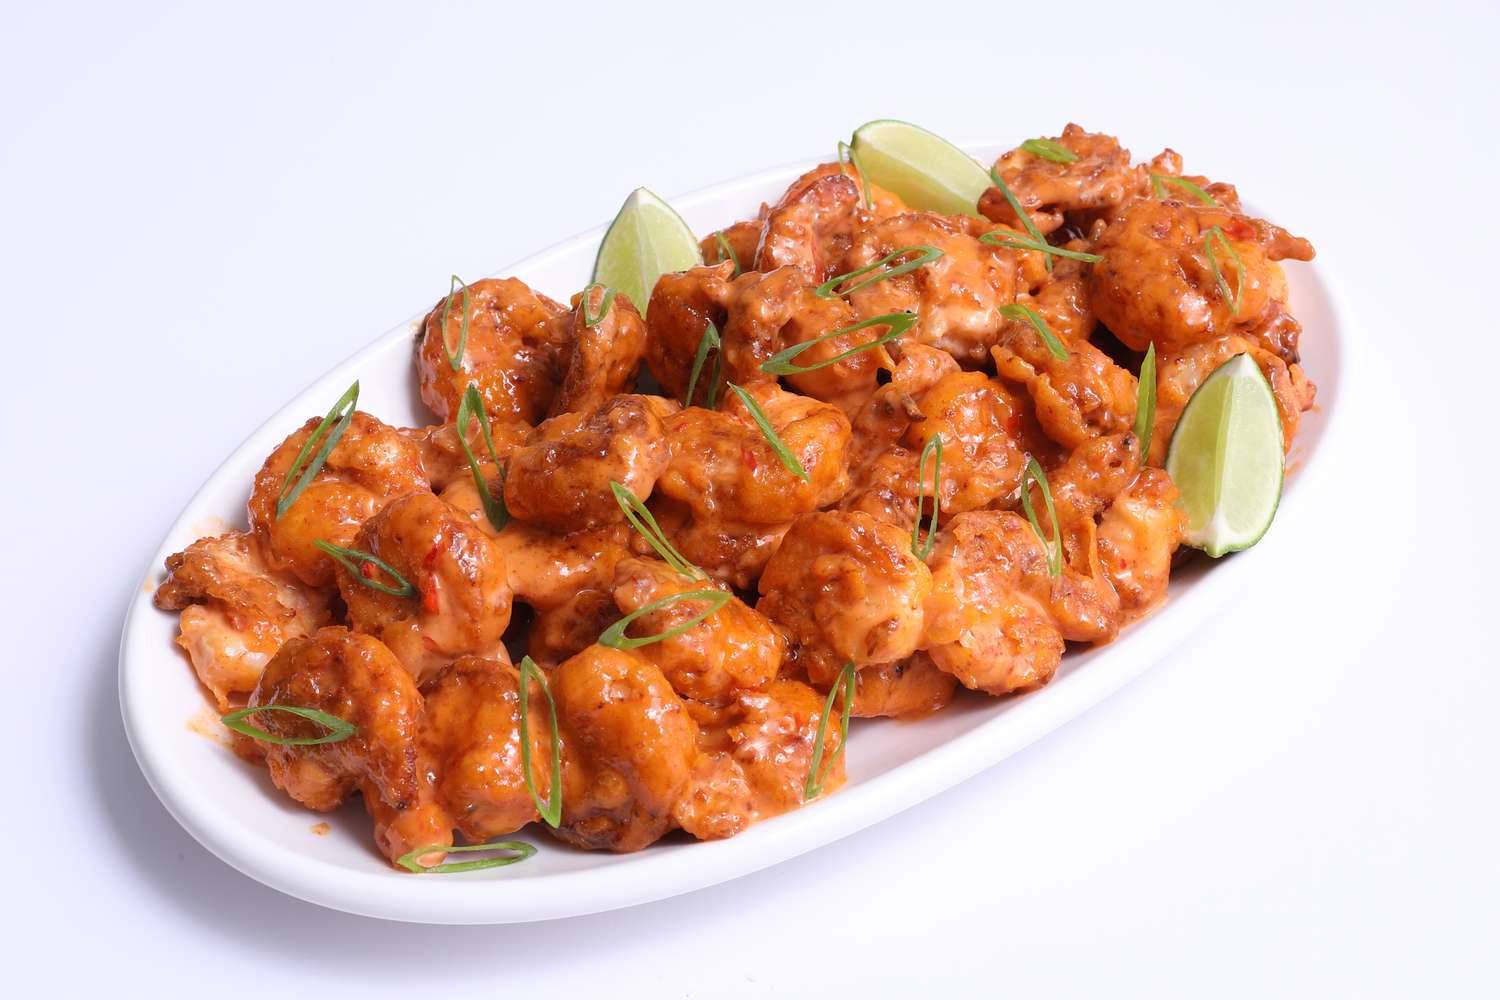 Orange-red colored bang bang shrimp on an oval white platter garnished with sliced scallions and lime wedges